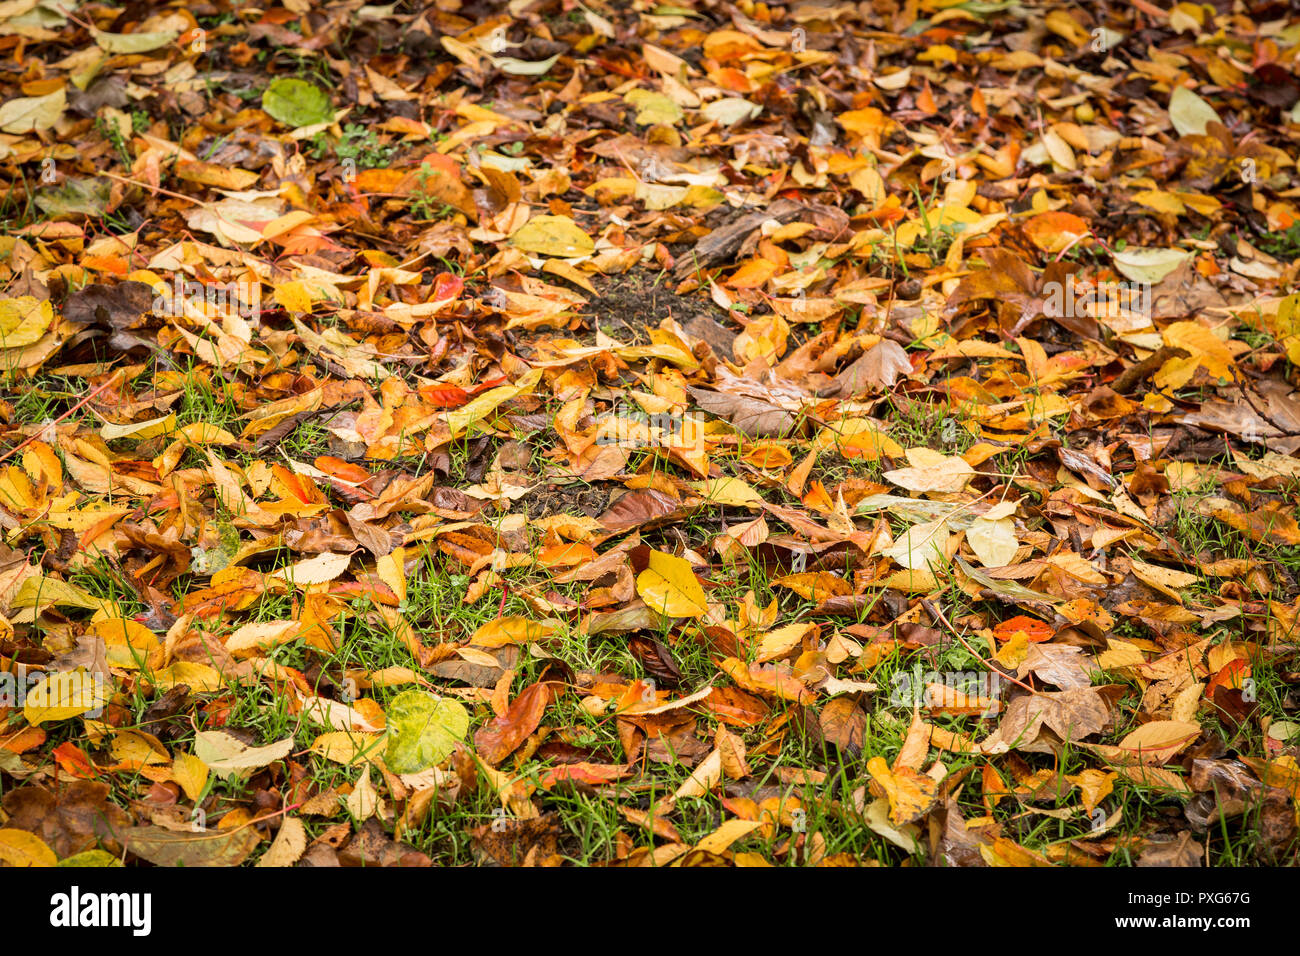 Autumn leaves on ground covering the grass Stock Photo